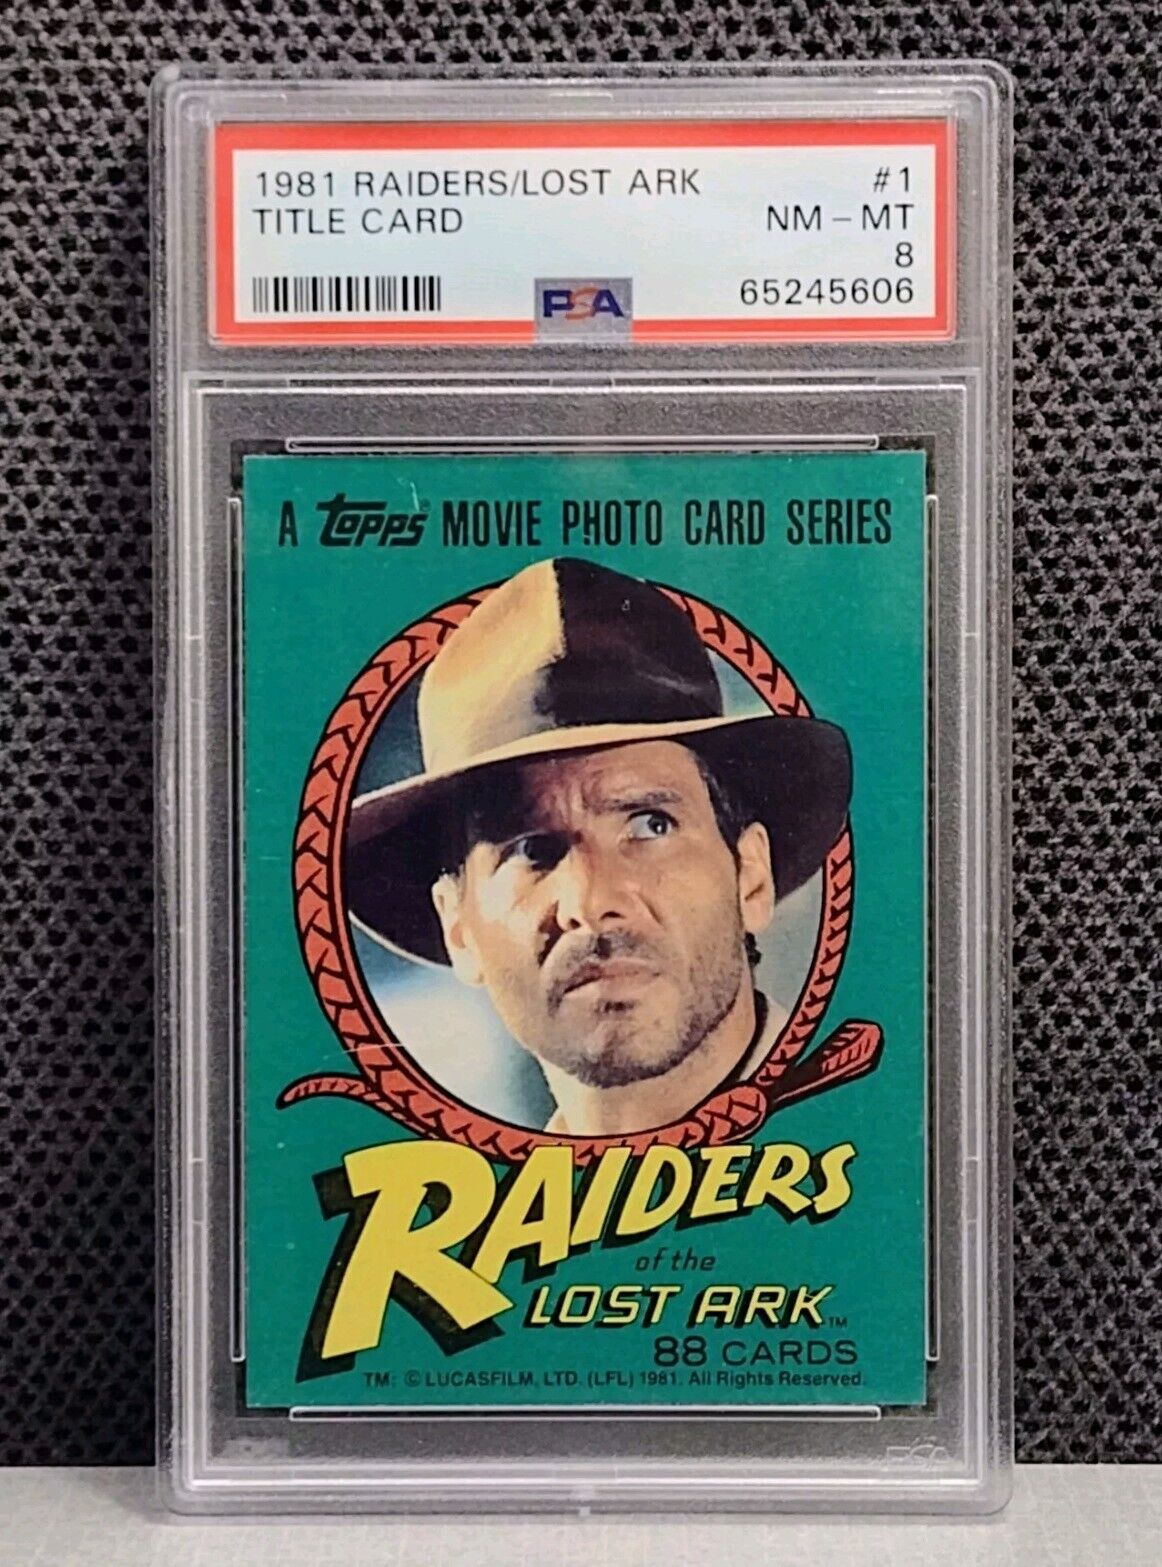 1981 Topps Raiders of the Lost Ark #1 TITLE CARD - PSA 8 NM-MT - INDIANA JONES